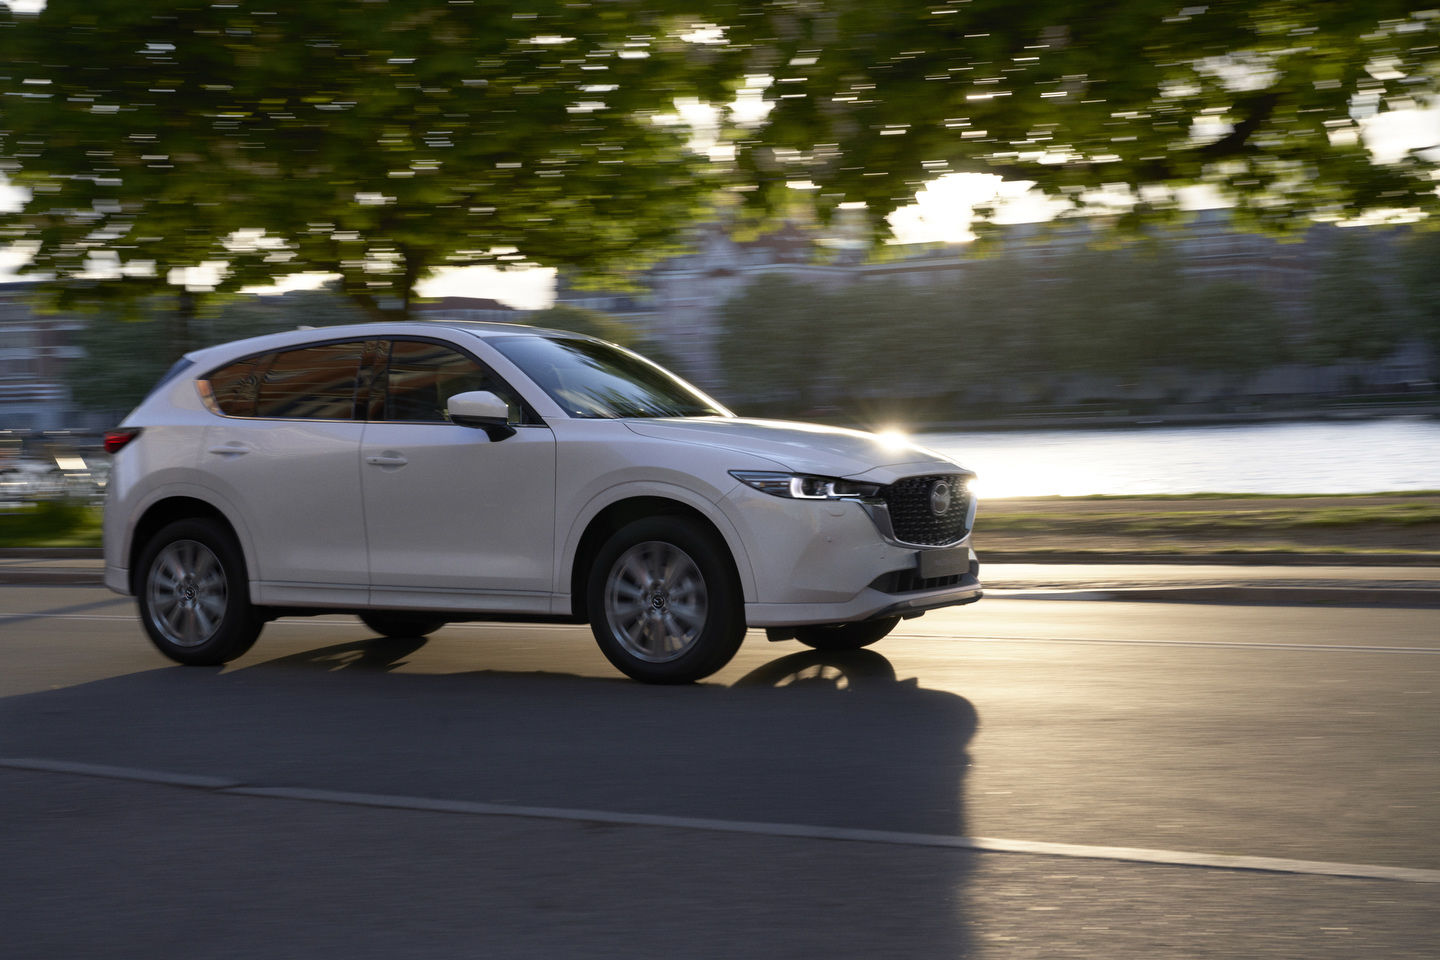 The 2022 Mazda CX-5 introduced with a range of improvements and enhancements